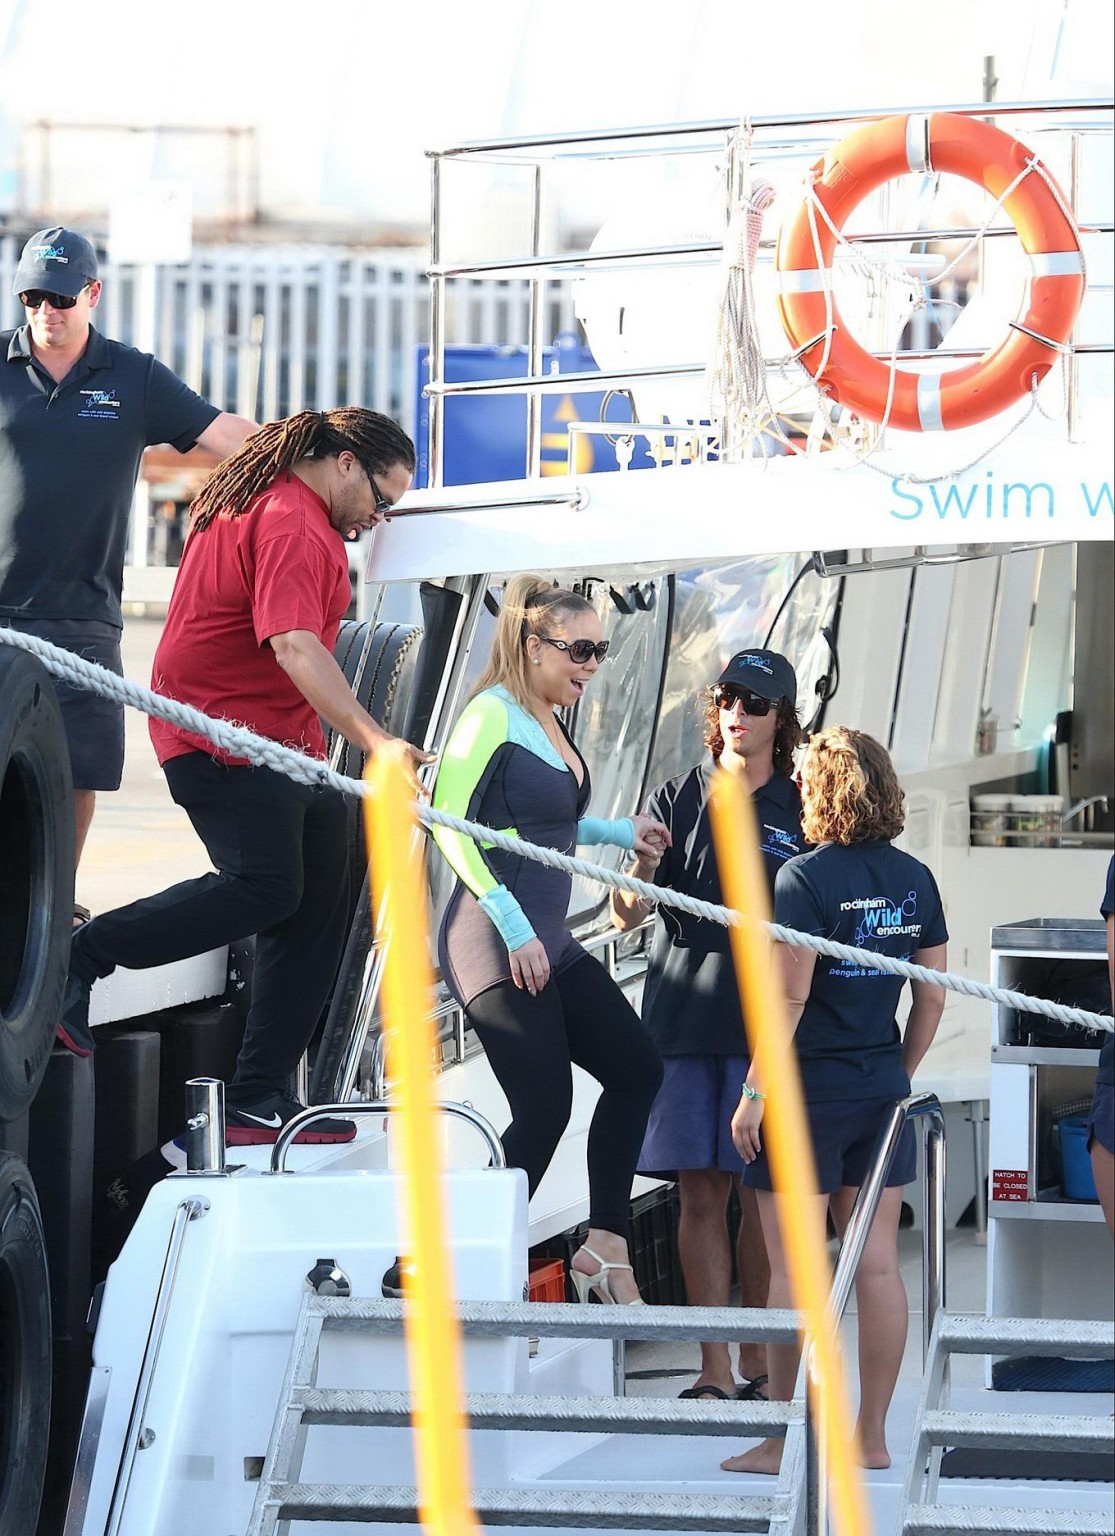 Busty Mariah Carey wearing bikini top and wet suit for a boat ride in Perth #75180683